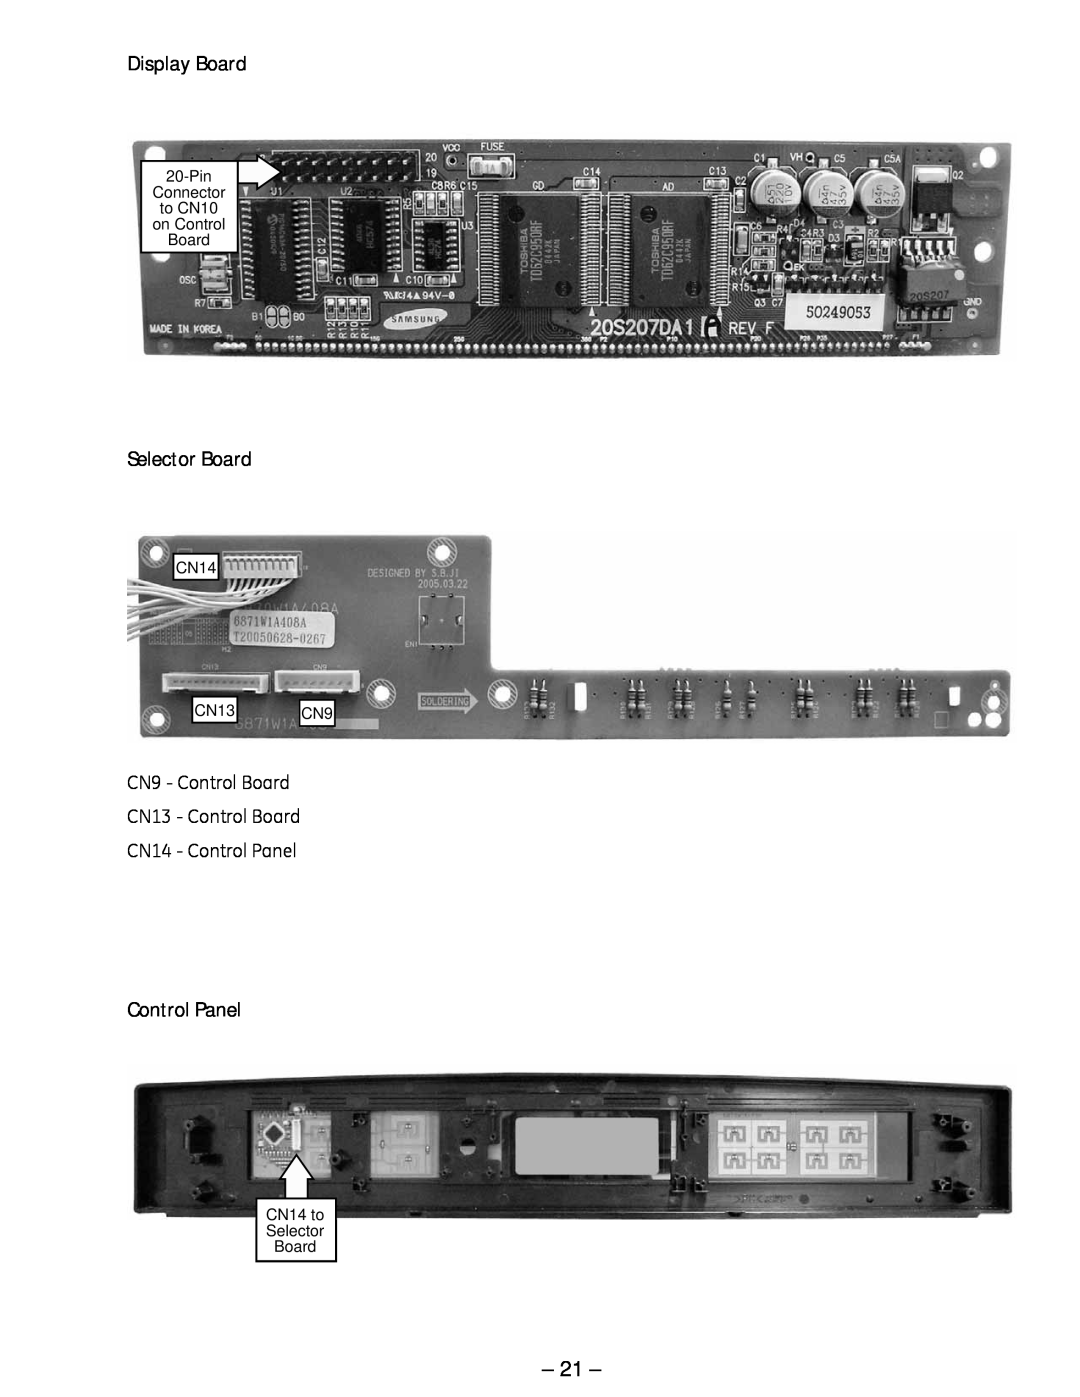 GE ZSC 1000, ZSC 1001, SCB 1001 Display Board, Selector Board, Control Panel, Pin Connector to CN10 on Control Board, CN14 